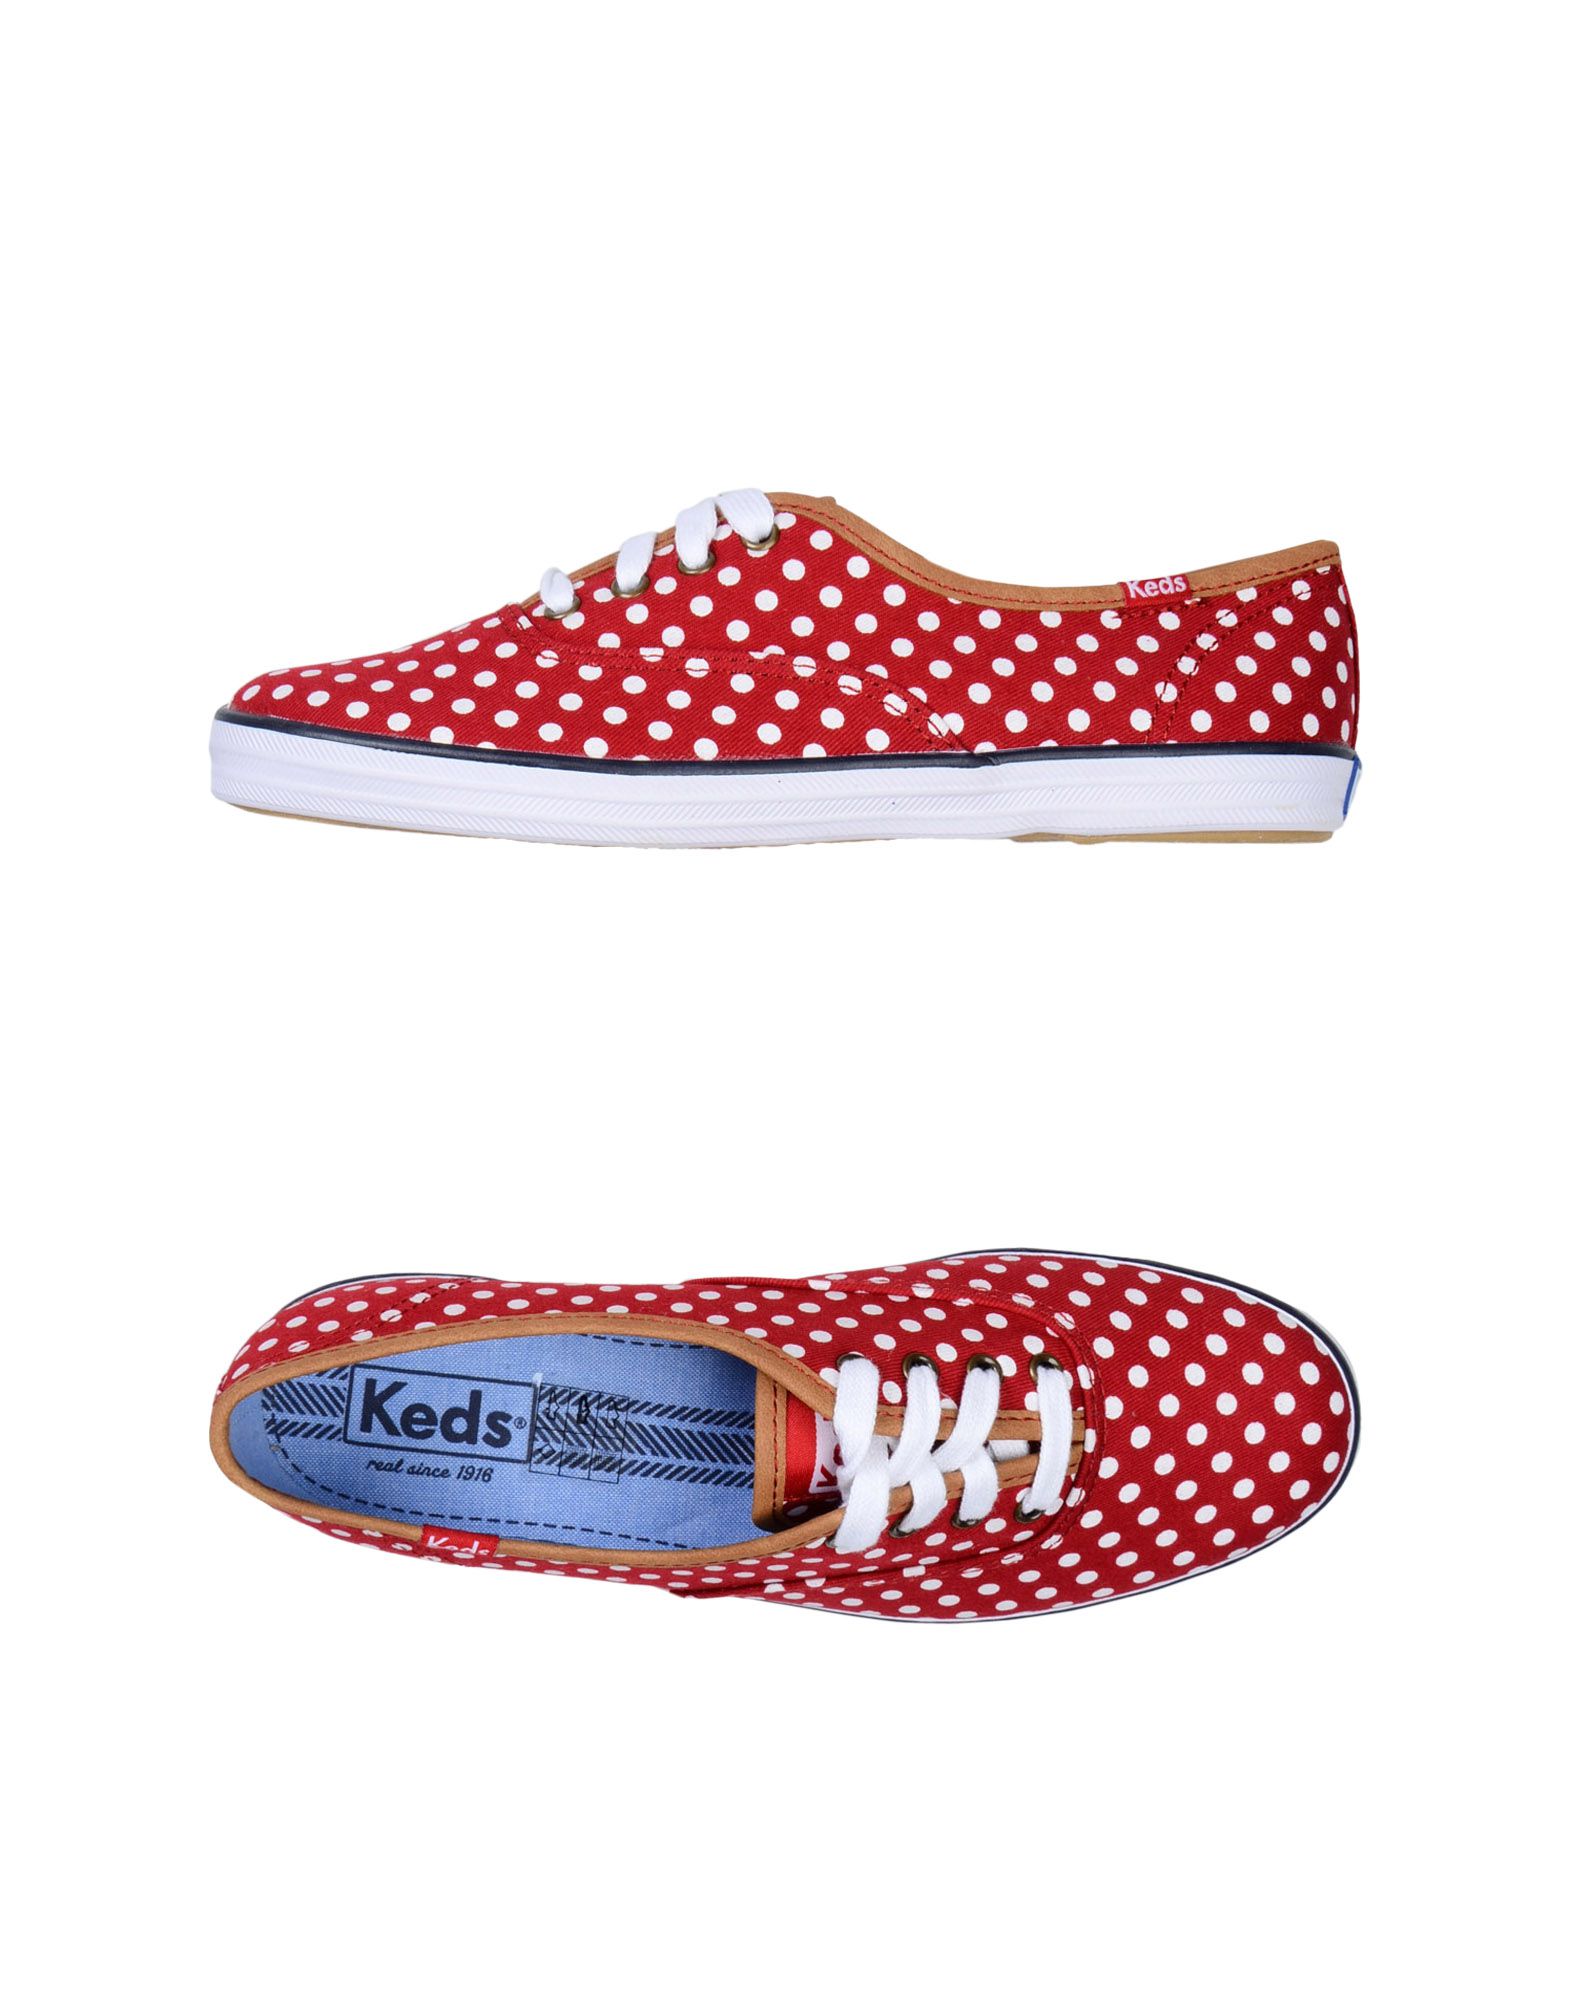 Foto Keds Sneakers Mujer Ladrillo